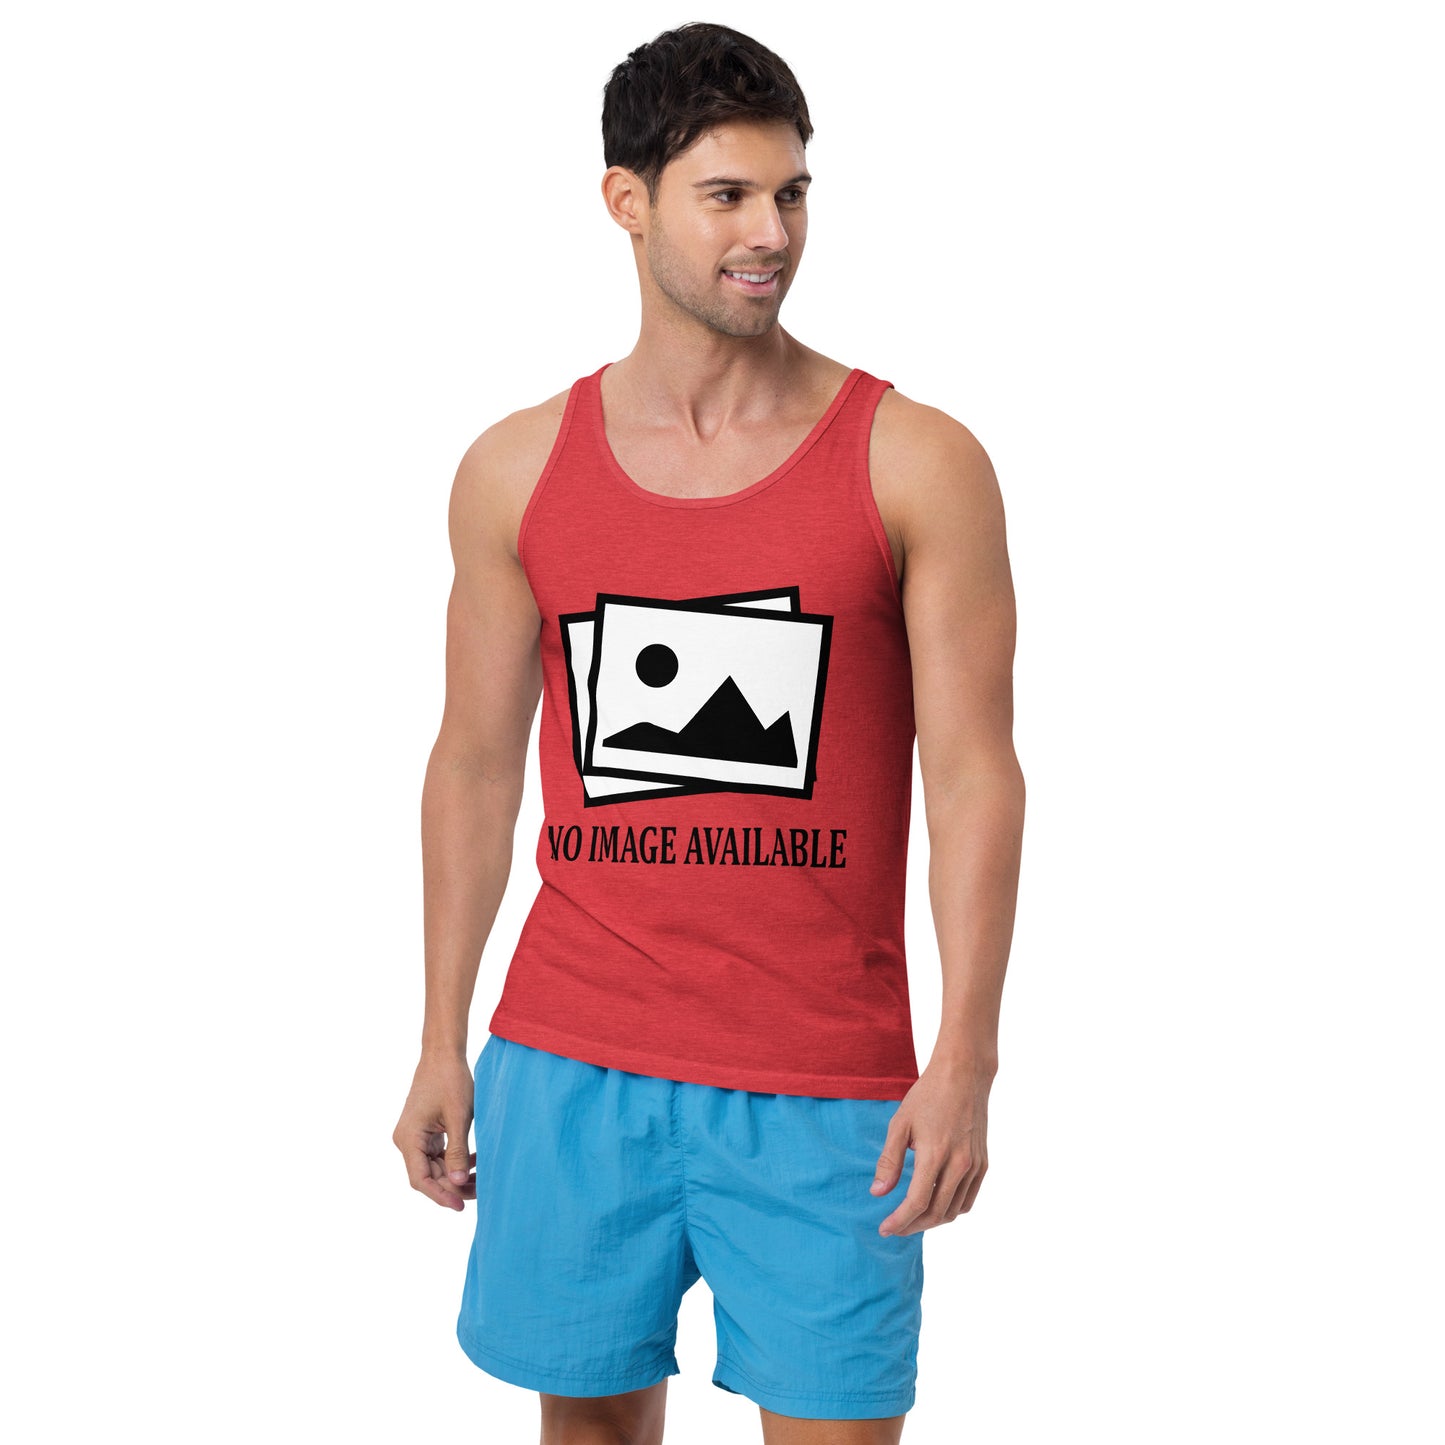 Men with red tank top with image and text "no image available"